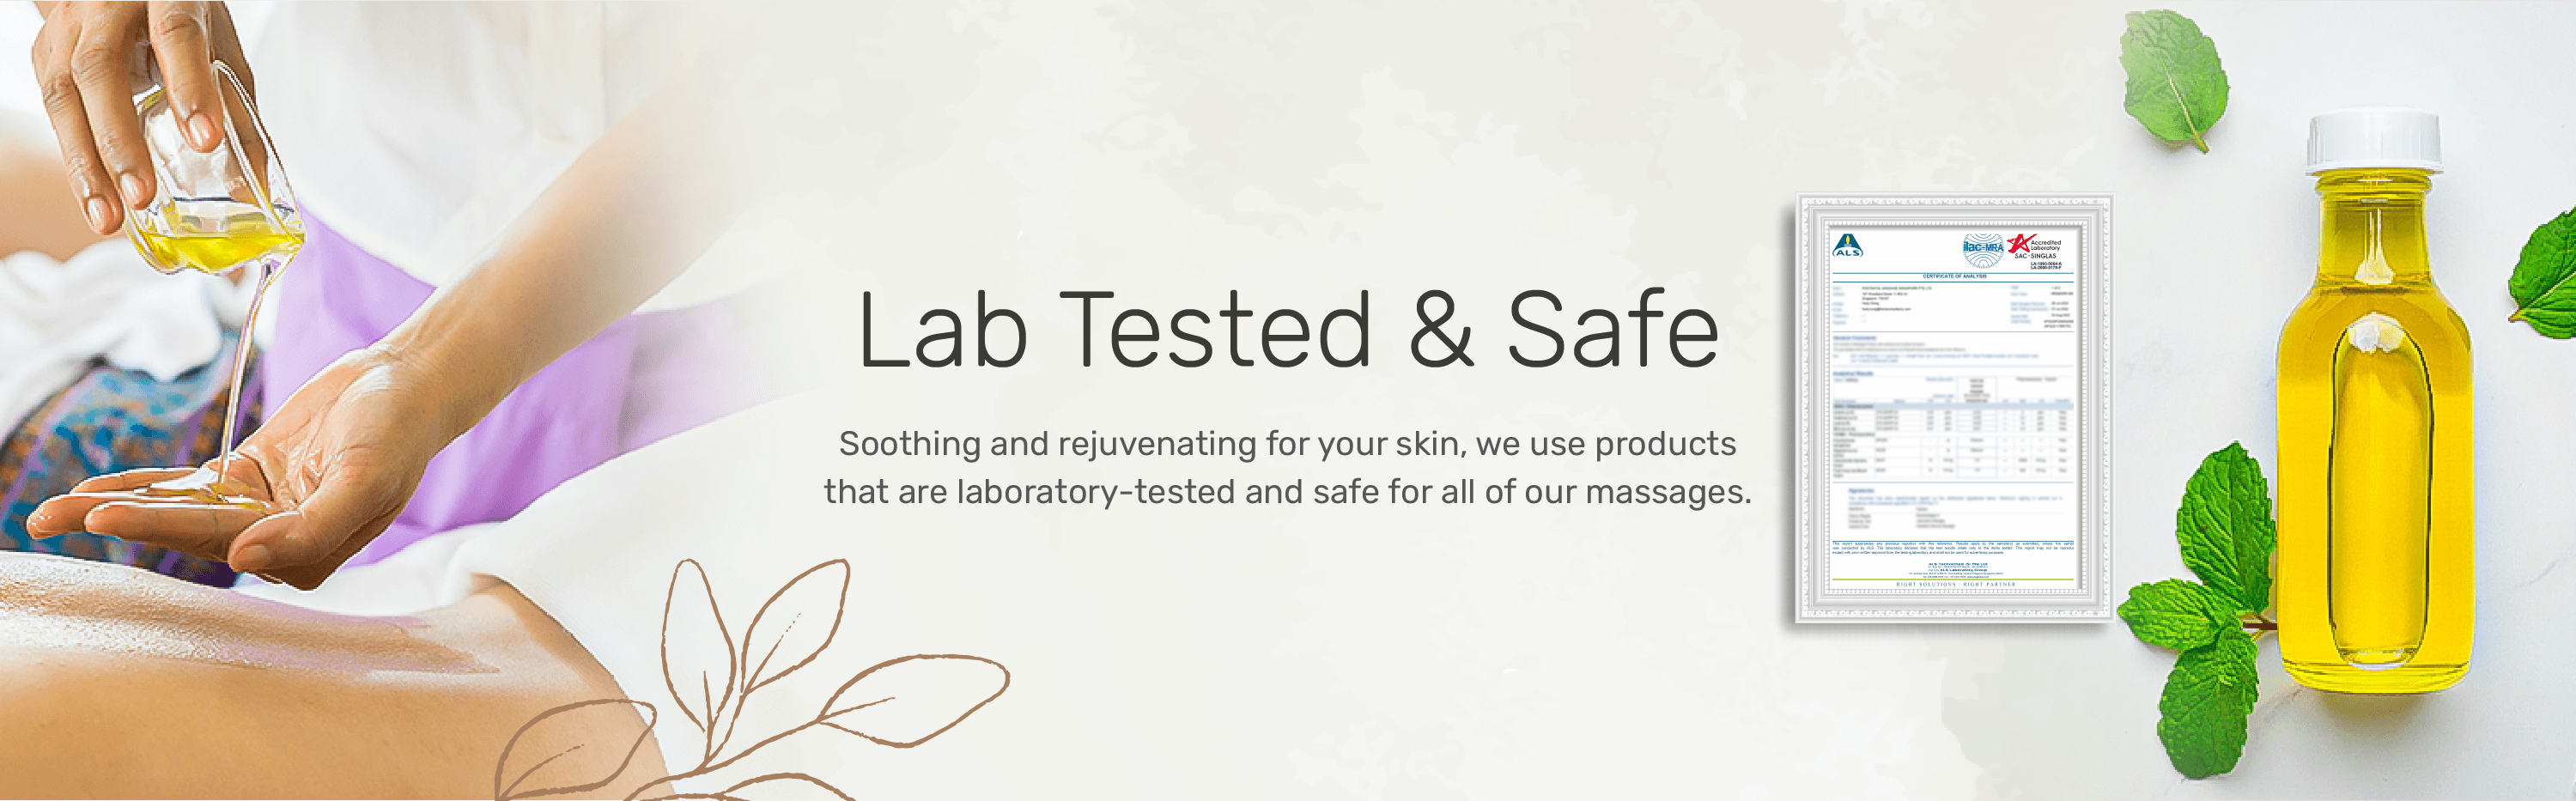 lab_tested_banner